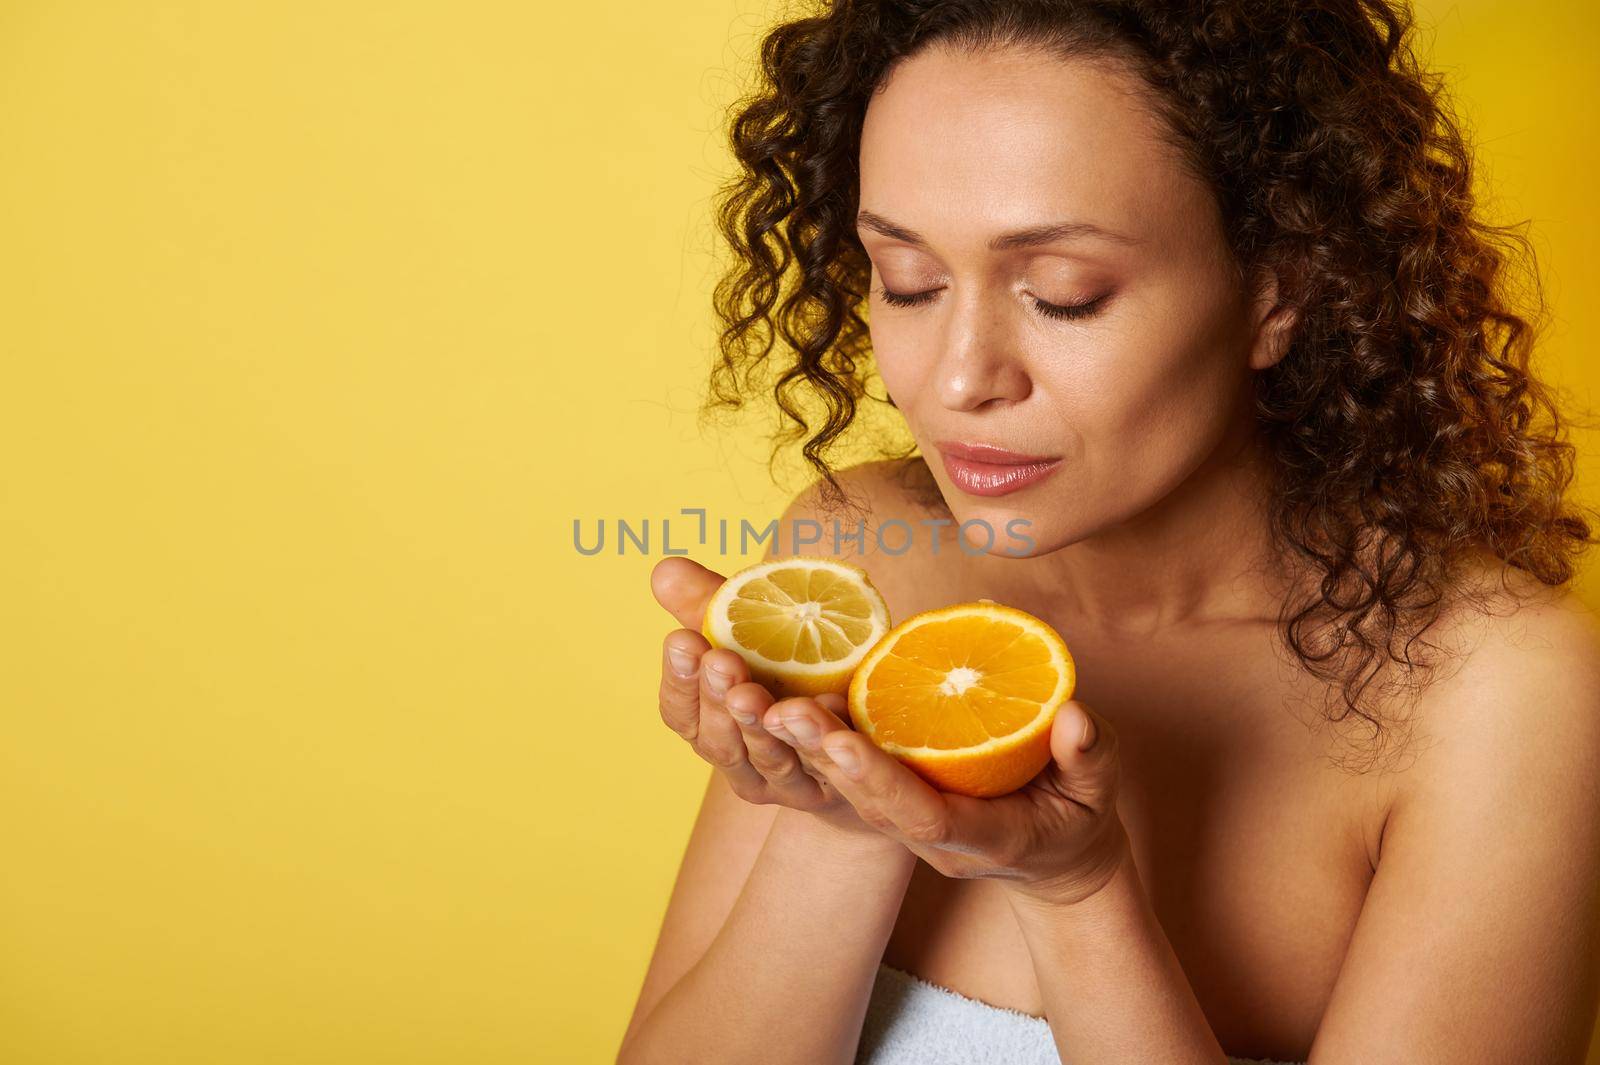 Beauty portrait of attractive curly half-naked woman with natural makeup and glowing hydrated facial skin, enjoying citrus scent in her hands. Isolated over yellow background with copy space